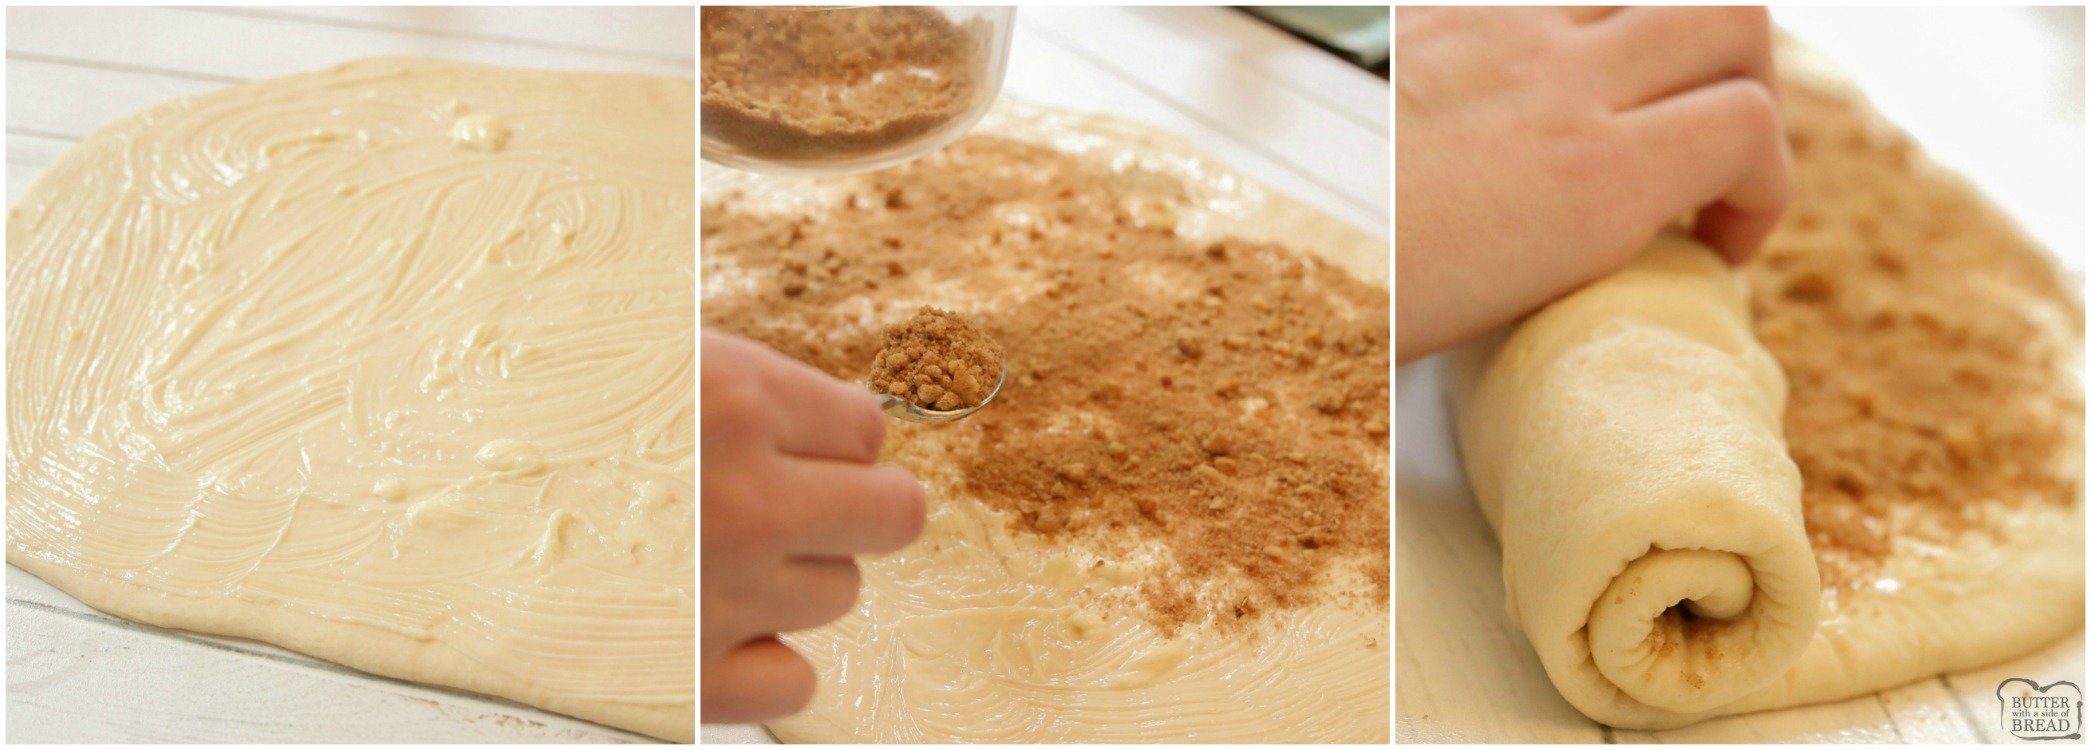 How to make homemade cinnamon rolls. How to make the filling for cinnamon rolls. 